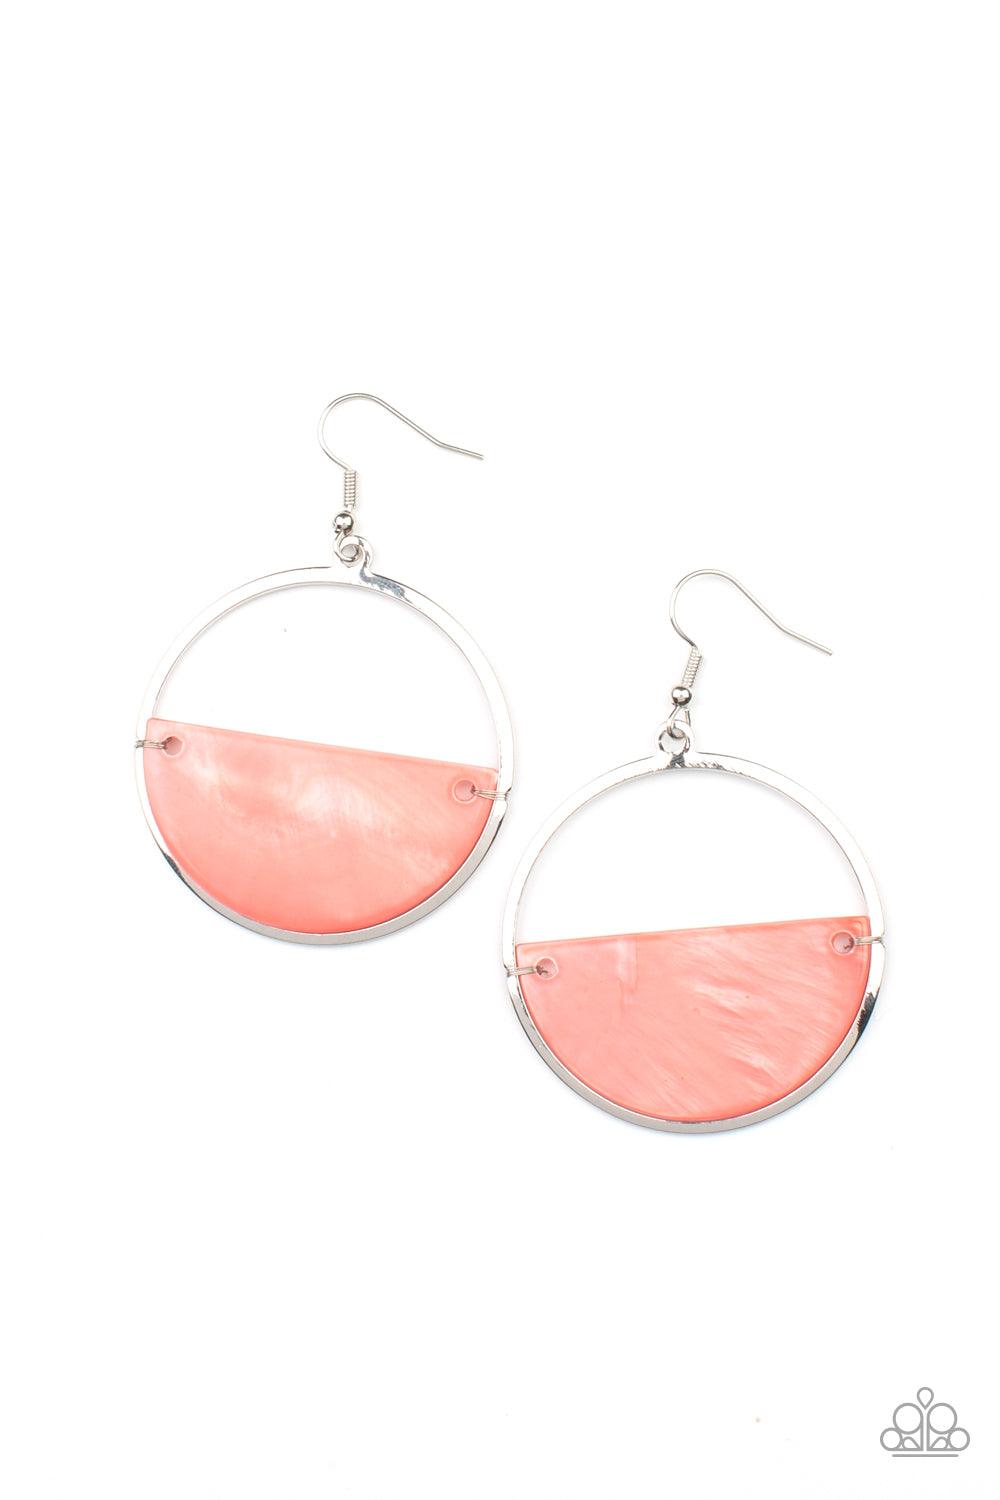 Paparazzi Accessories Seashore Vibes - Orange Brushed in an iridescent shimmer, a Burnt Coral half moon shell attaches to the bottom of a flat silver hoop for a summery splash of color. Earring attaches to a standard fishhook fitting. Sold as one pair of